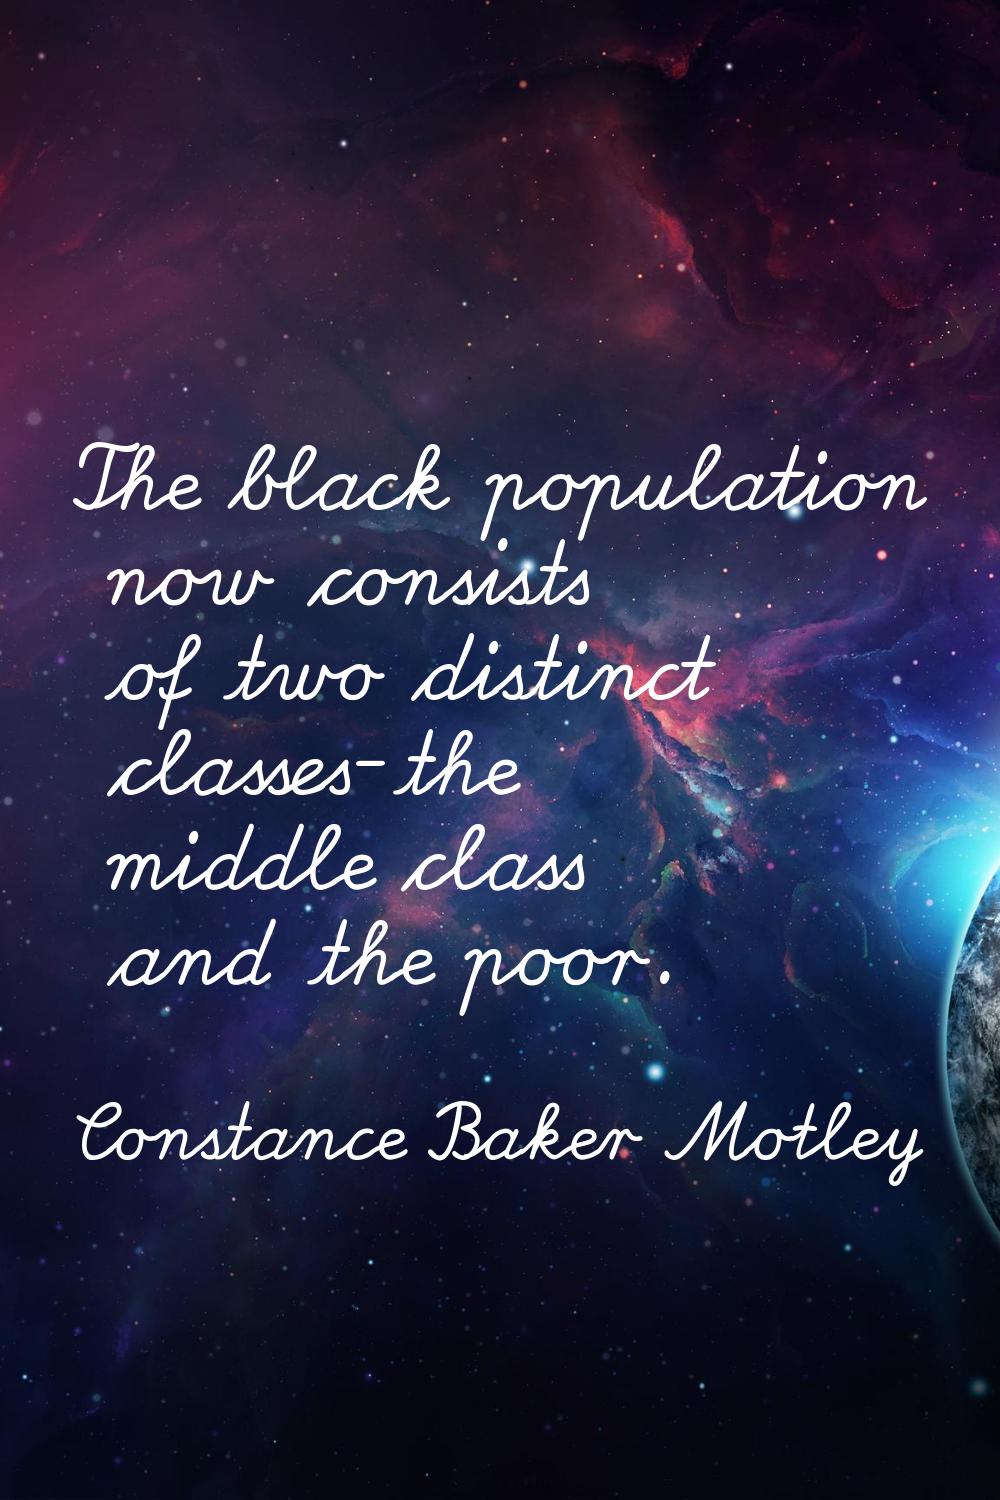 The black population now consists of two distinct classes-the middle class and the poor.